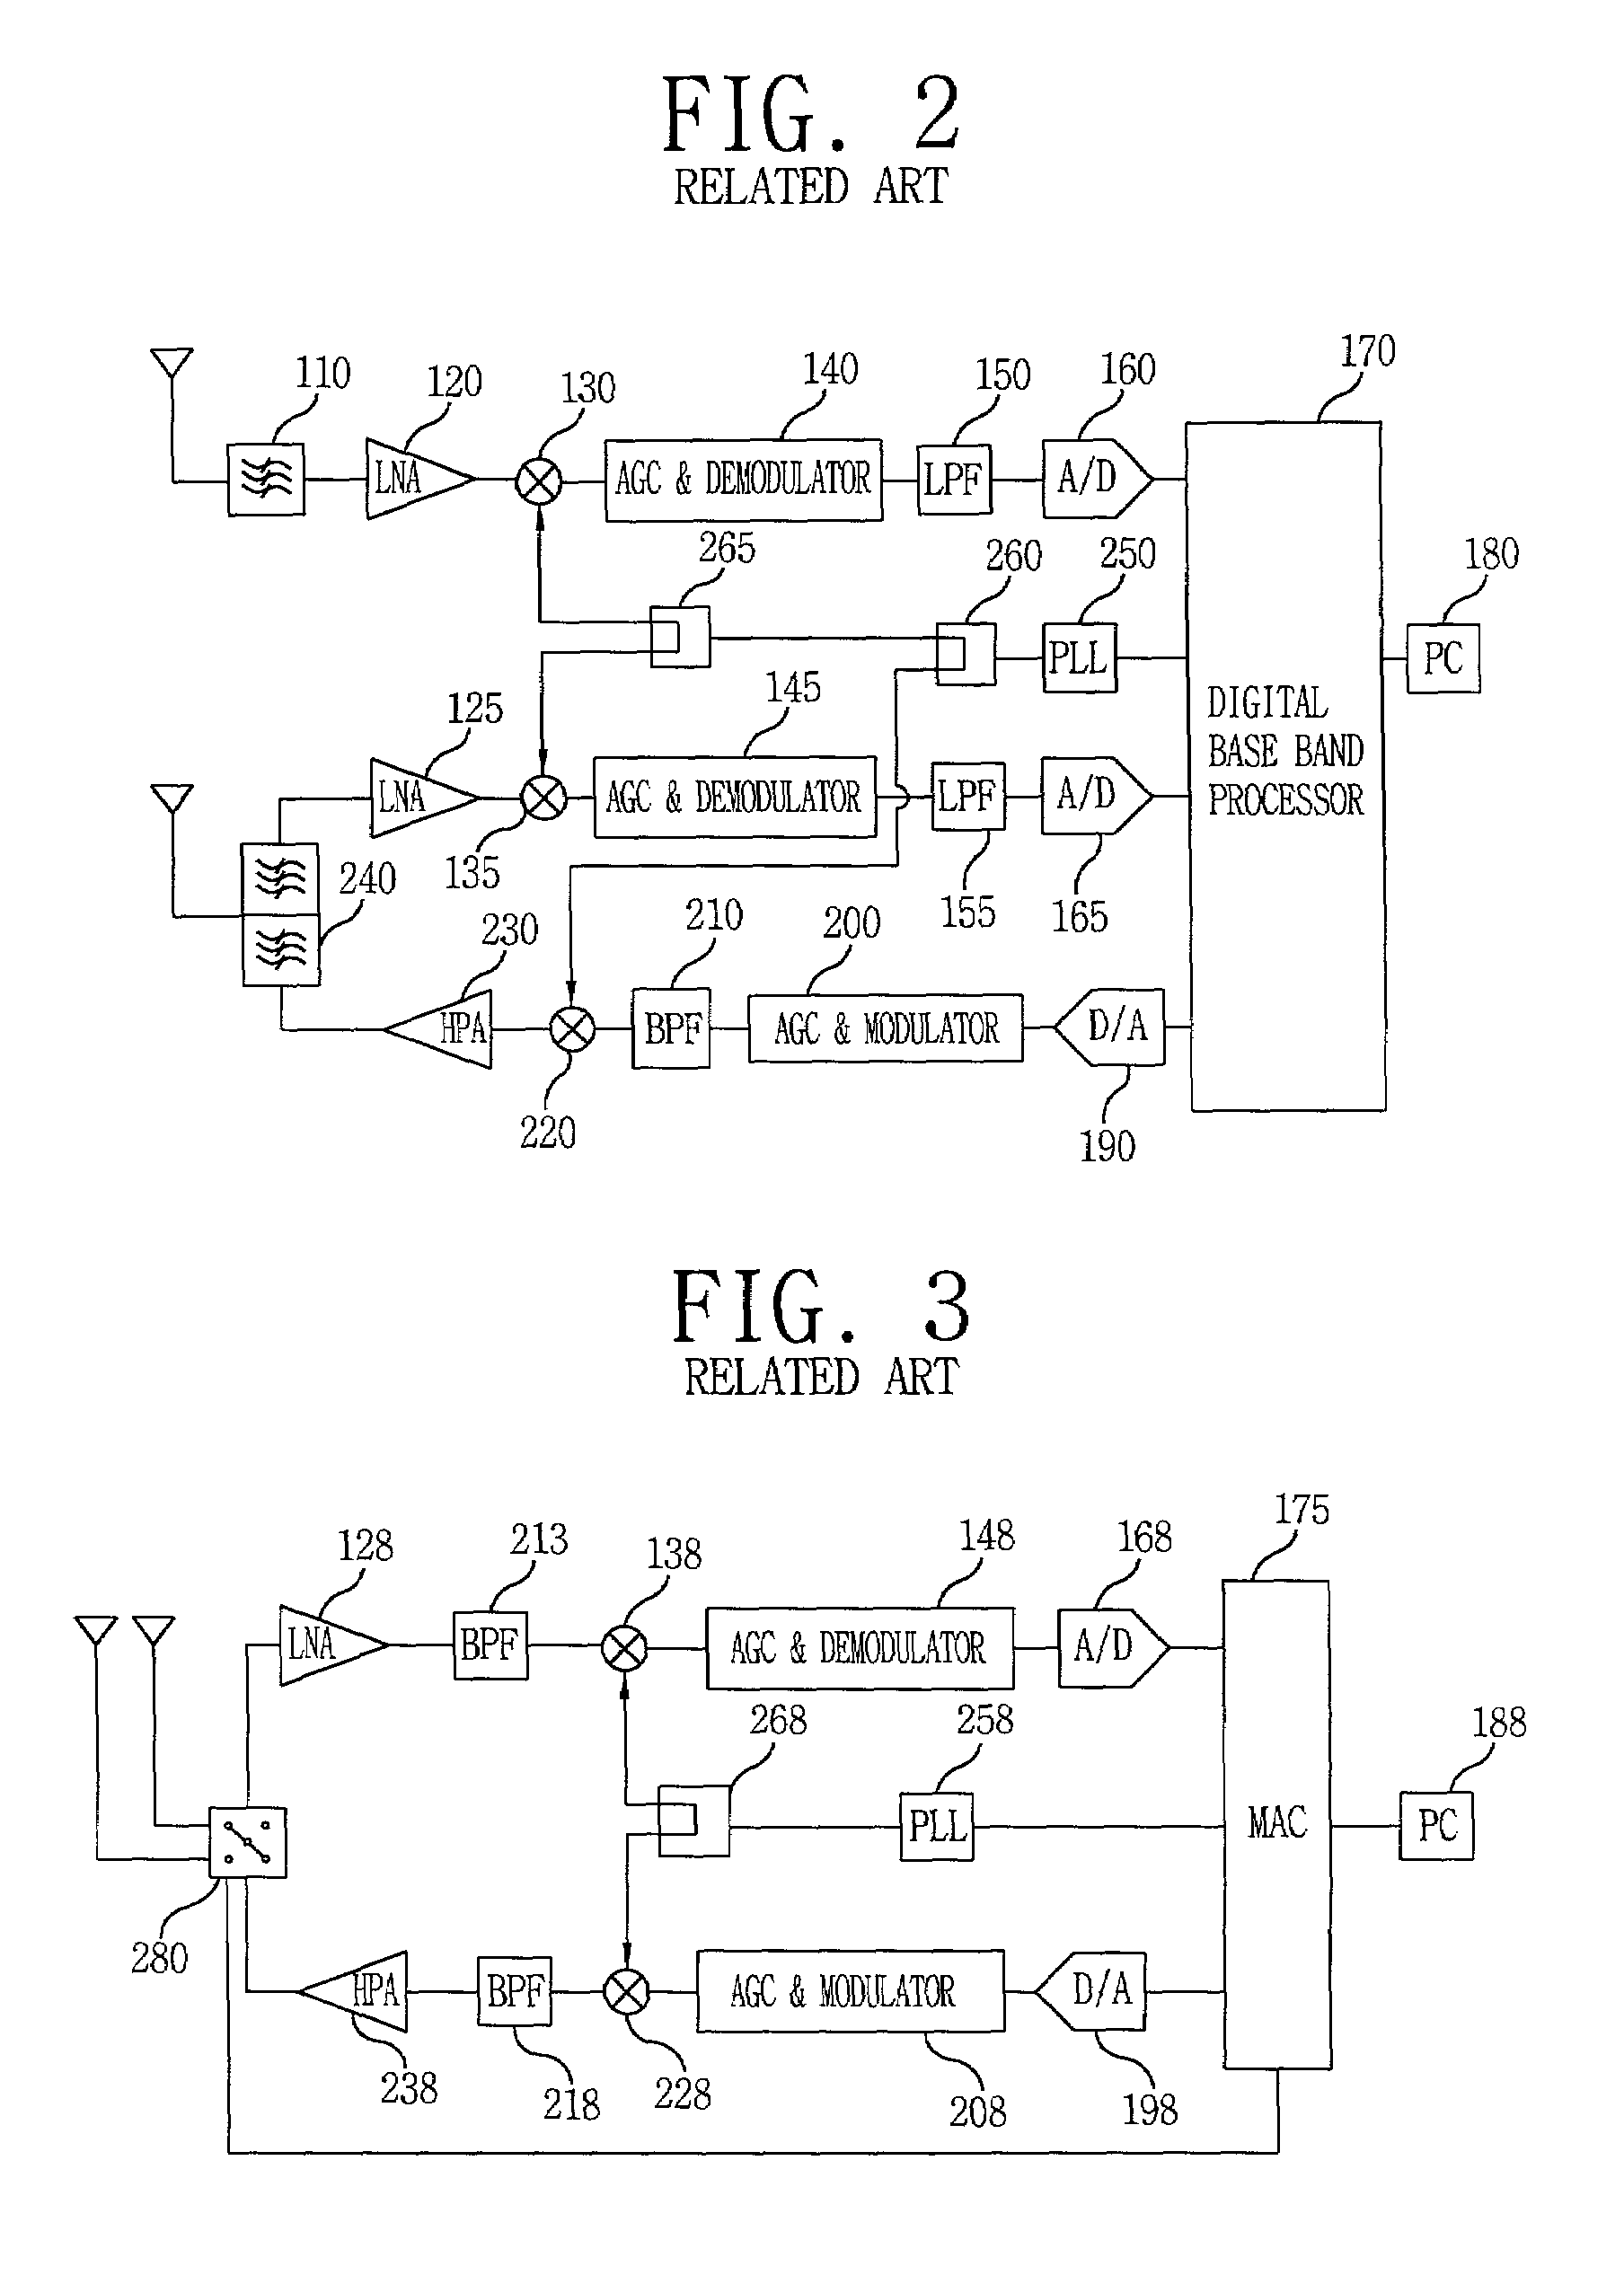 Integrated wireless local loop (WLL) and wireless local area network (WLAN) transceiver apparatus